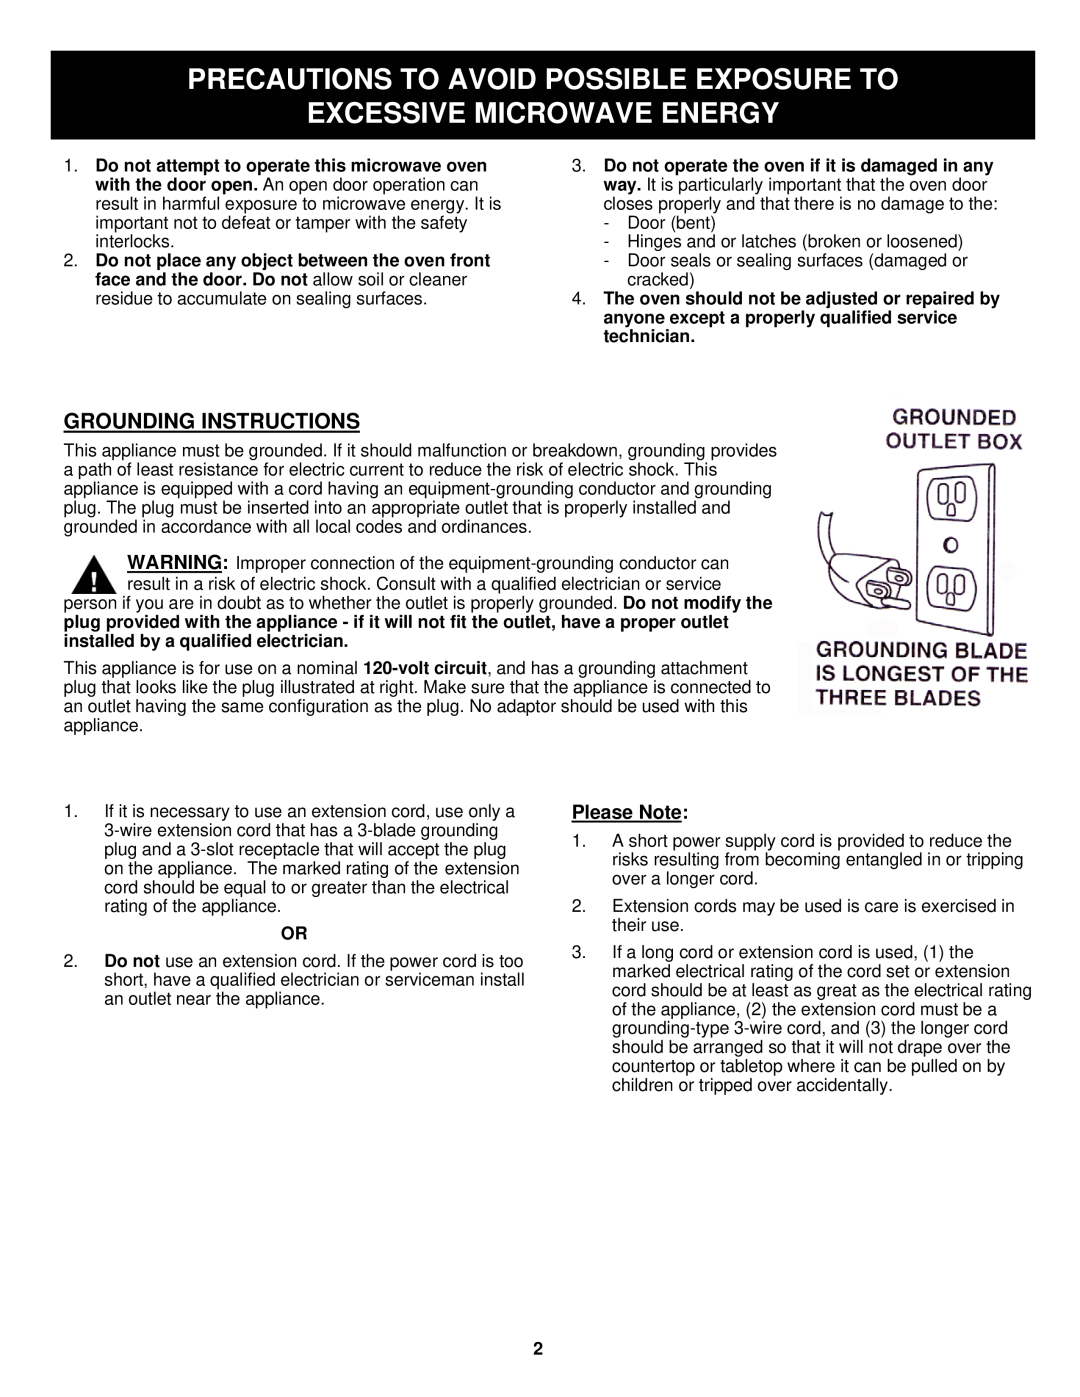 Euro-Pro K5309H owner manual Precautions To Avoid Possible Exposure To, Excessive Microwave Energy, Grounding Instructions 